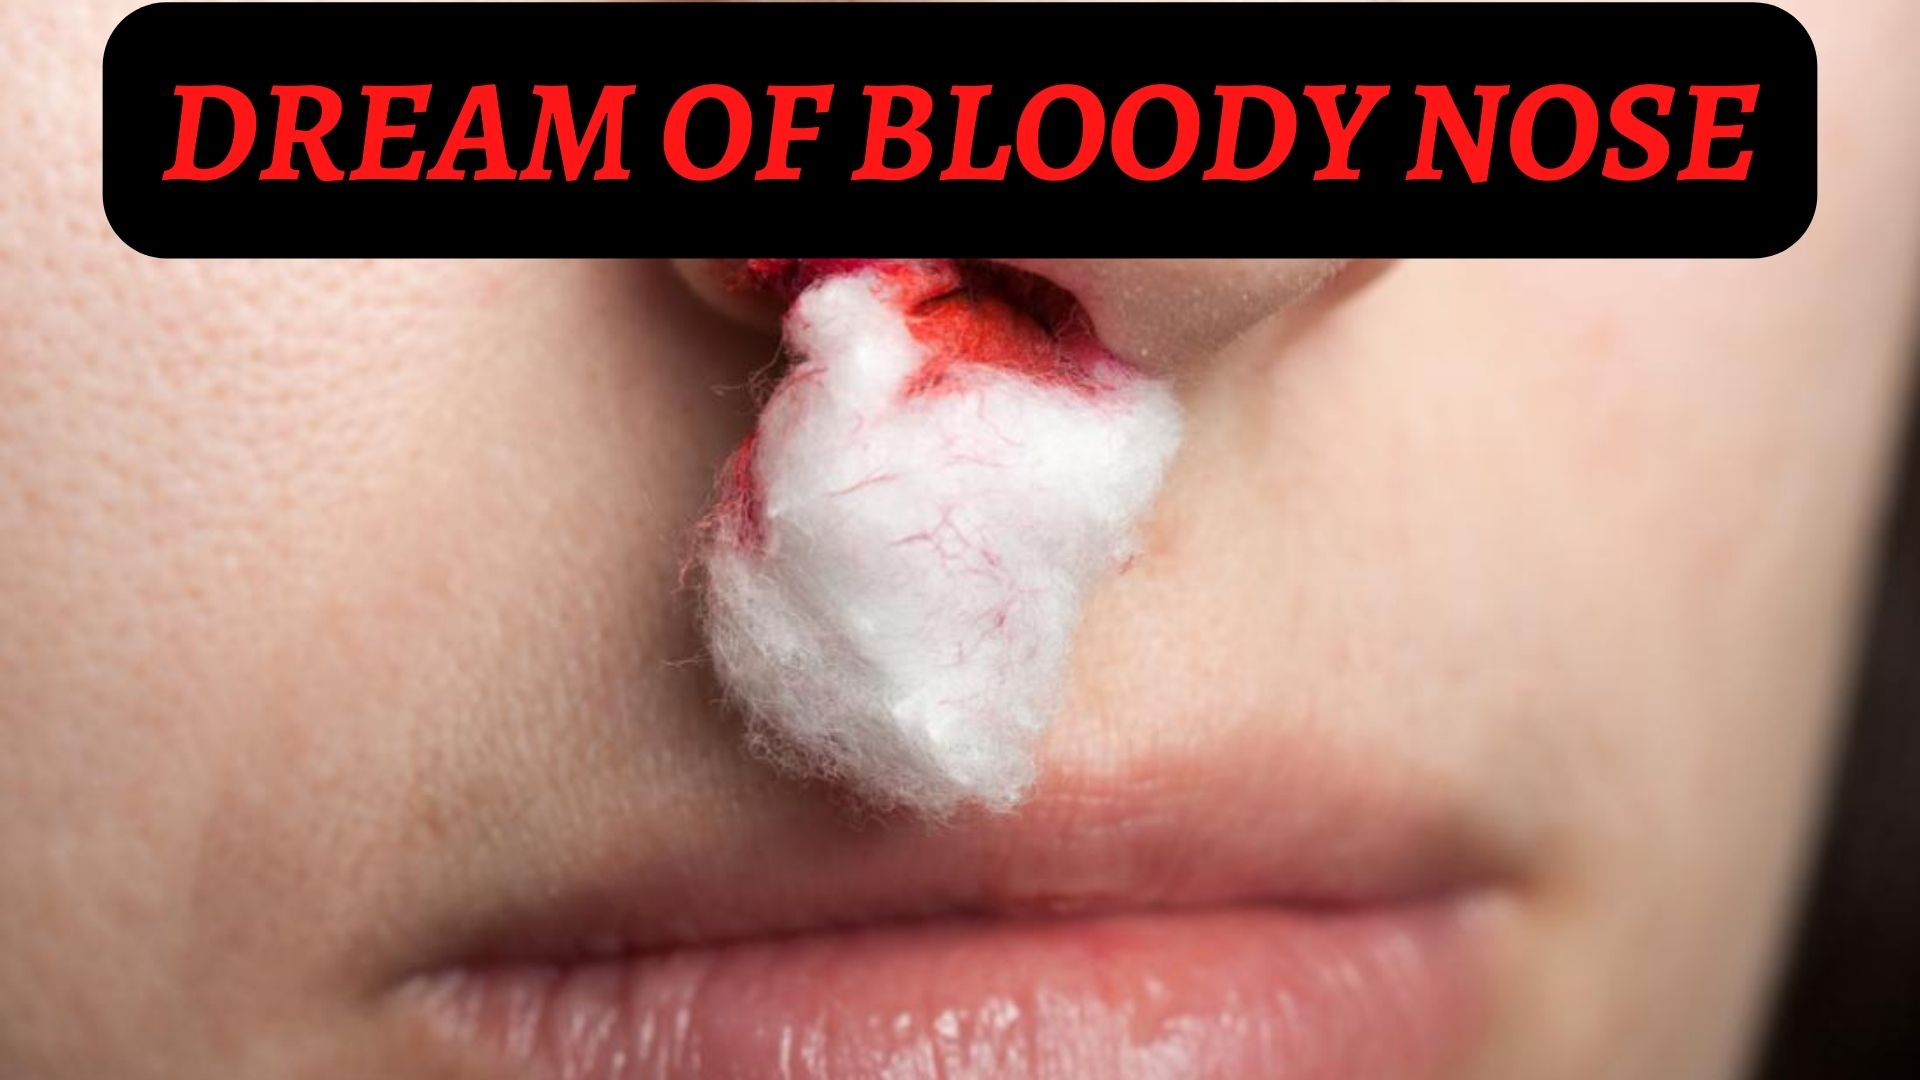 Dream Of Bloody Nose - Meaning And Symbolism